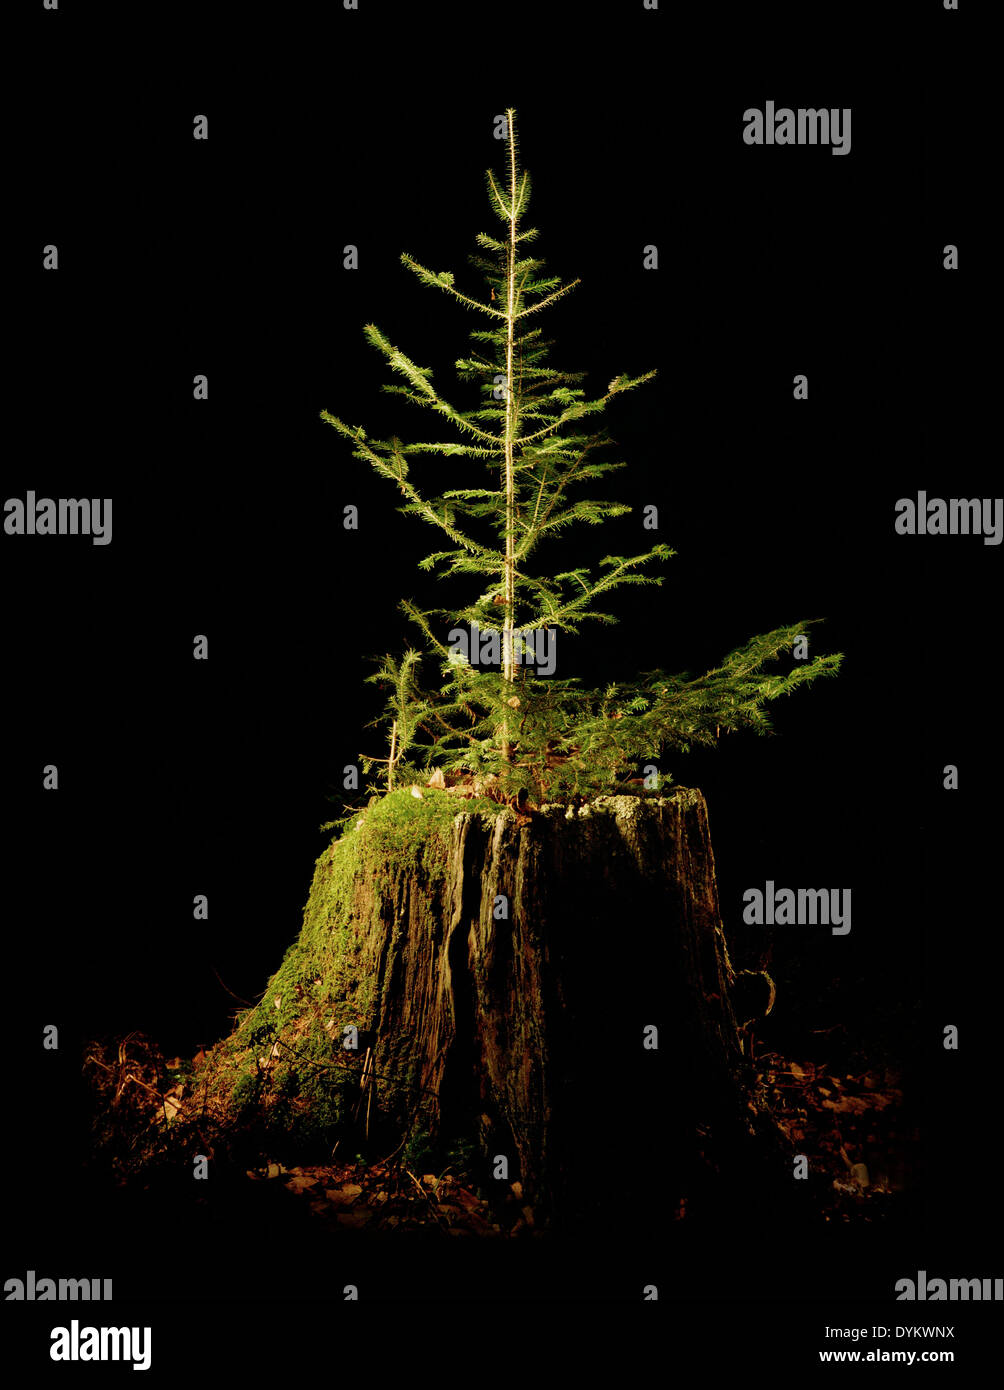 Fir tree growing out of decaying tree stump. Stock Photo